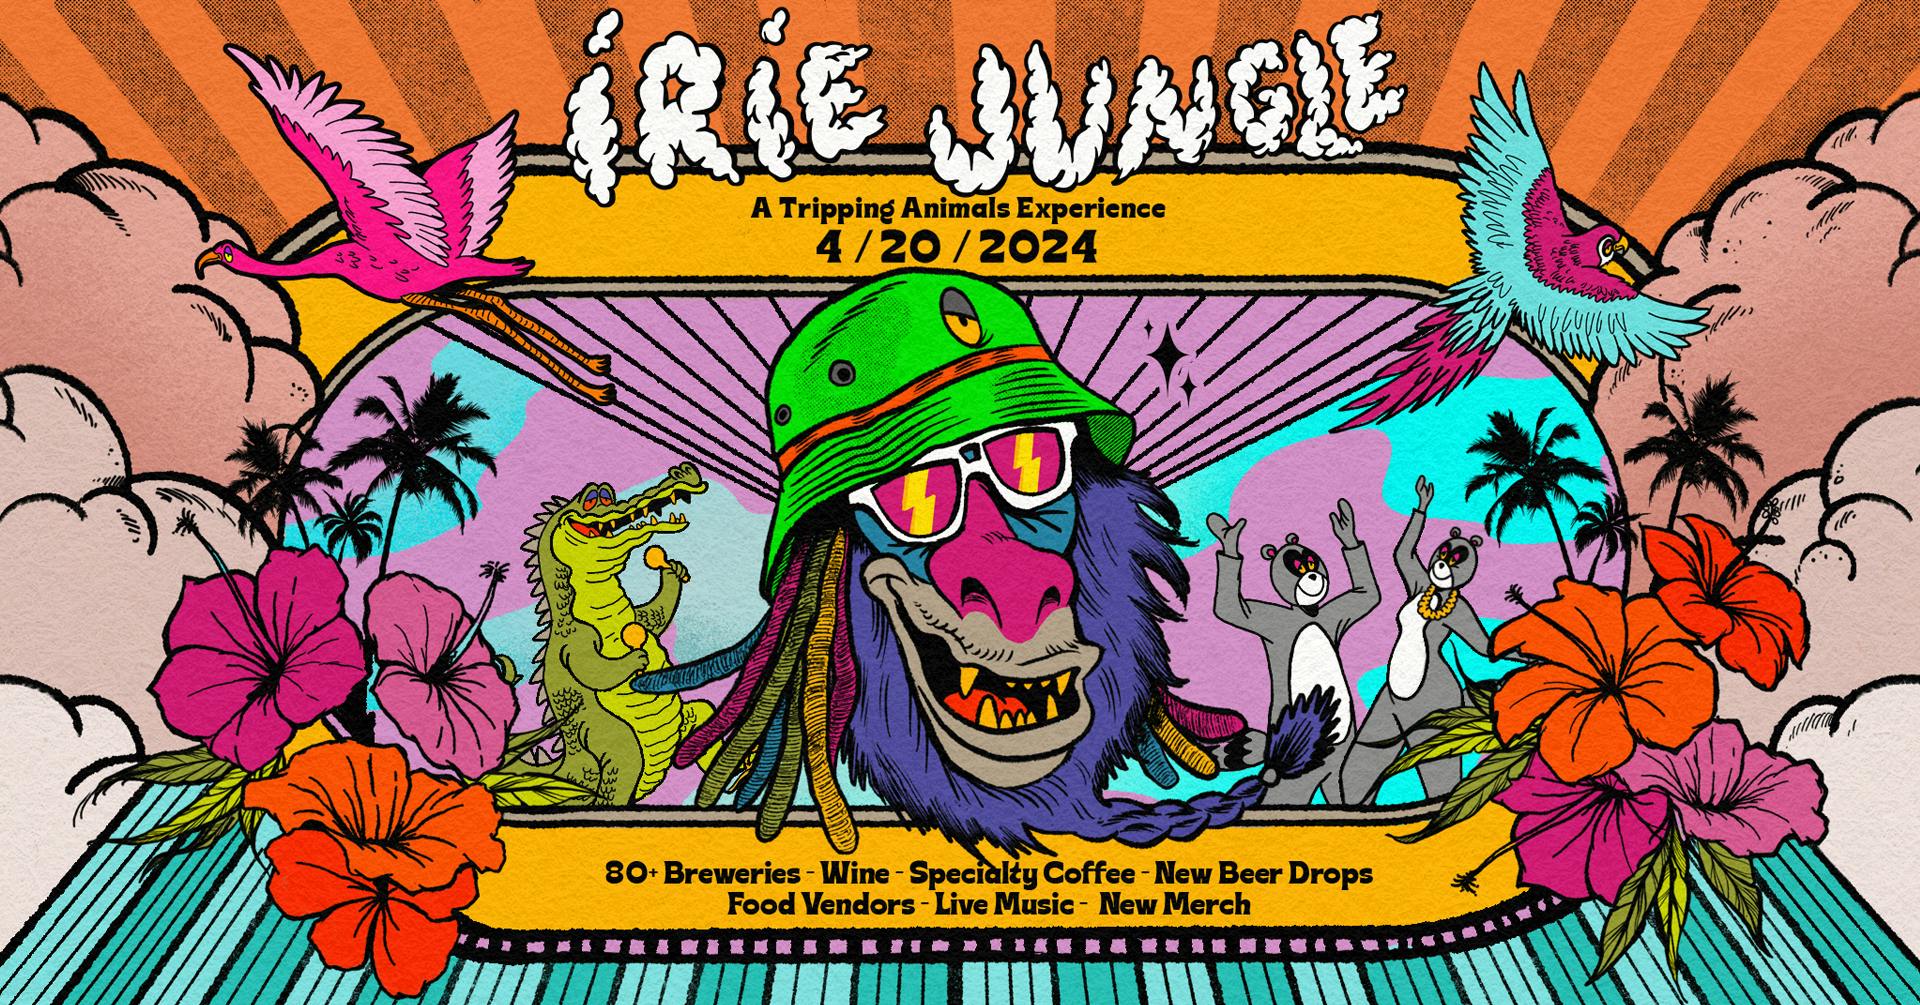 Tripping Animals Irie Jungle Event hero image - monkey with green hat and orange sunglasses, colorful hand-drawn background